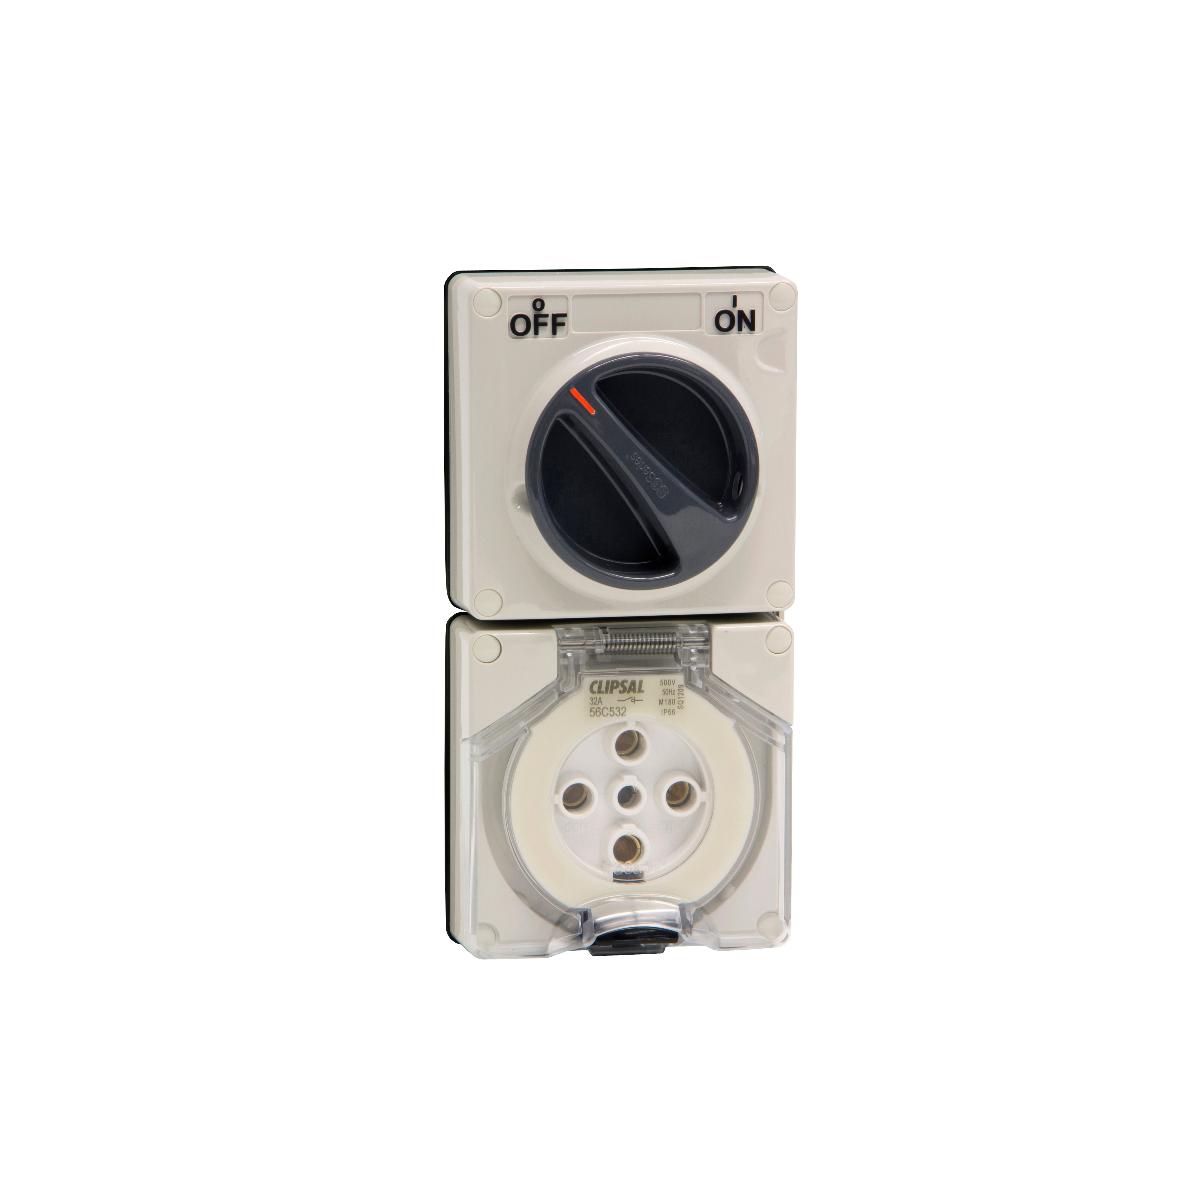 OUTLET SWITCHED IP66 5PIN 32A 500V LE GR